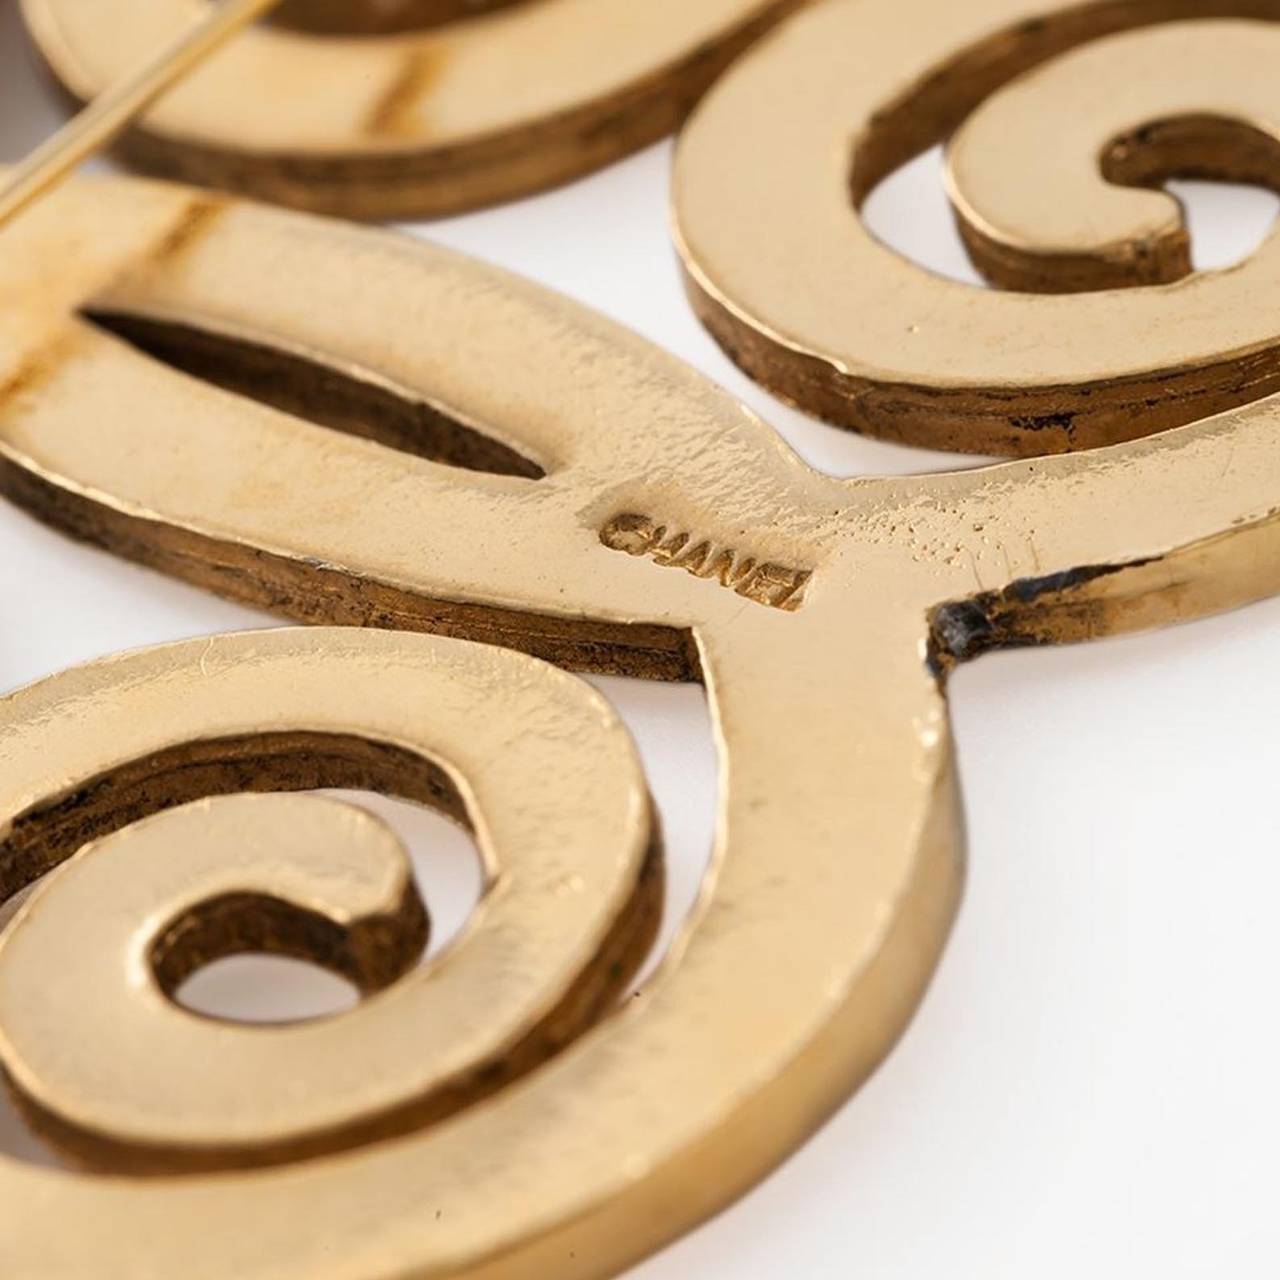 This charming Gold-tone vintage brooch from Chanel features a swirl design and is the perfect accessory for any outfit night or day.

Measurements: Width: 6.5cm, Length: 6.5cm

Material: Gold -tone Metal

Colour: Gold